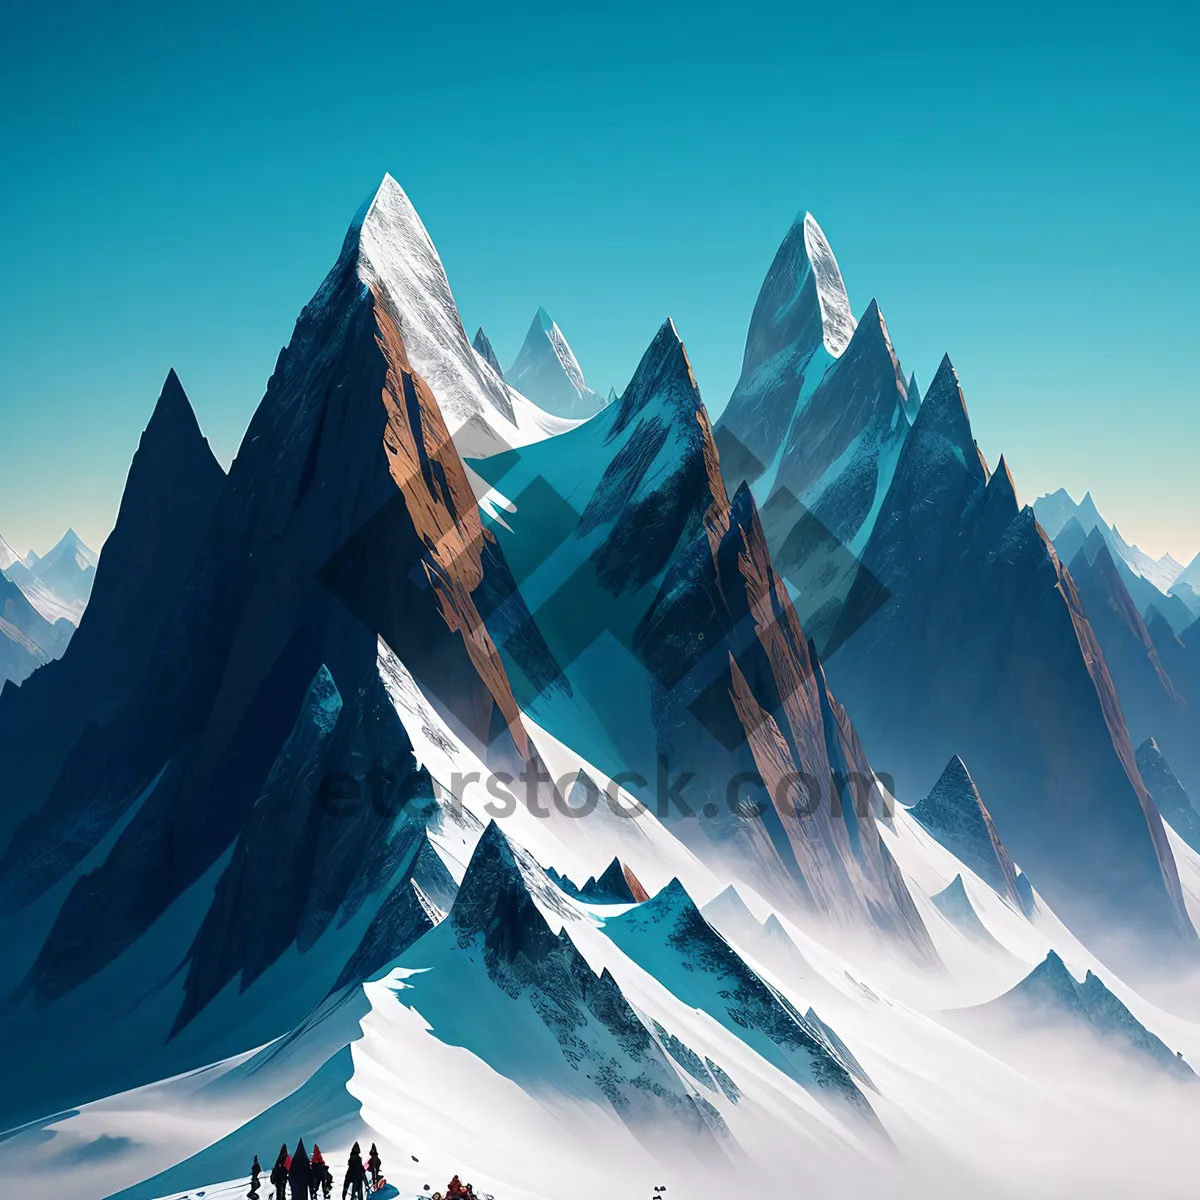 Picture of Snow-capped Mountain Peaks in Majestic Winter Landscape.